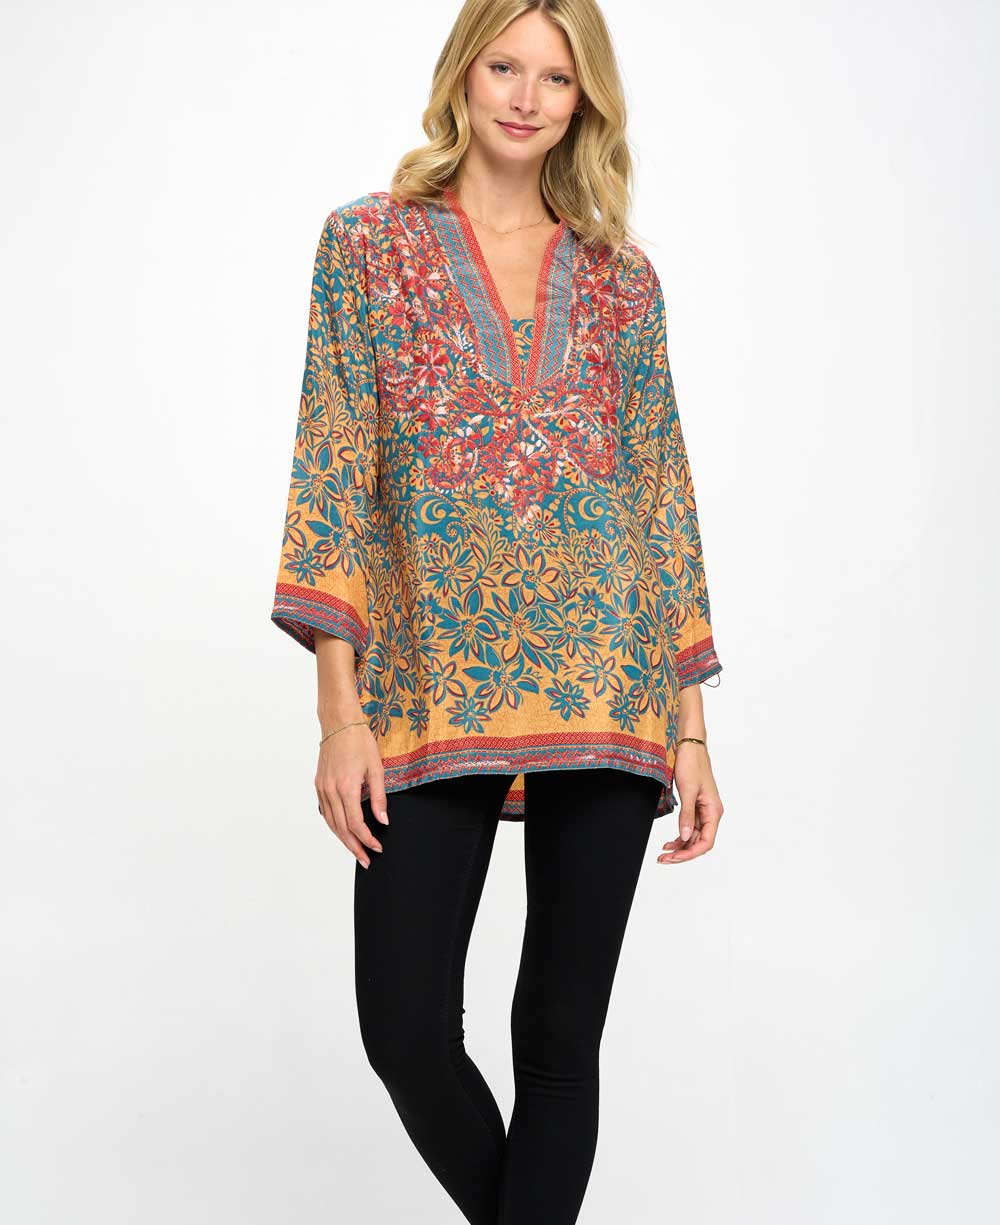 Embroidered Floral Burst Tunic Top - Shirts & Tops S